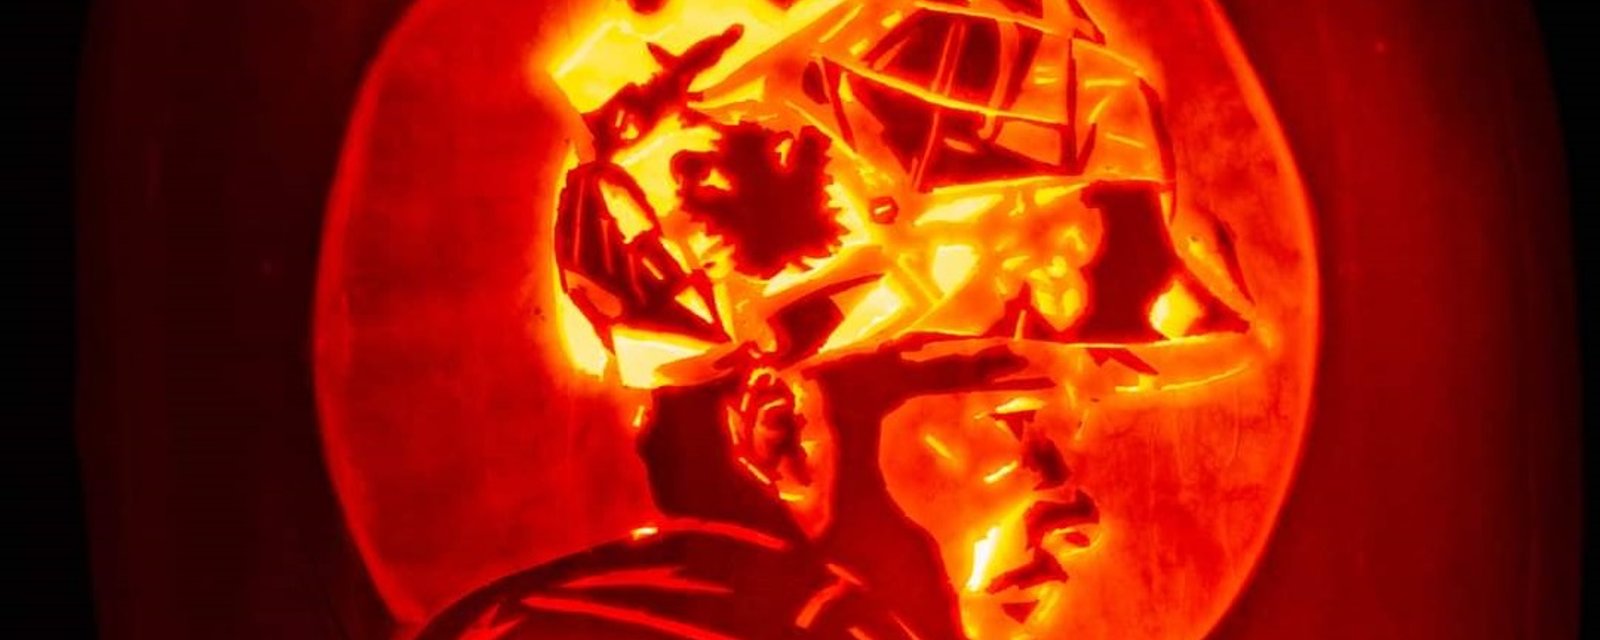 A look at some of this year's NHL themed pumpkin carvings.